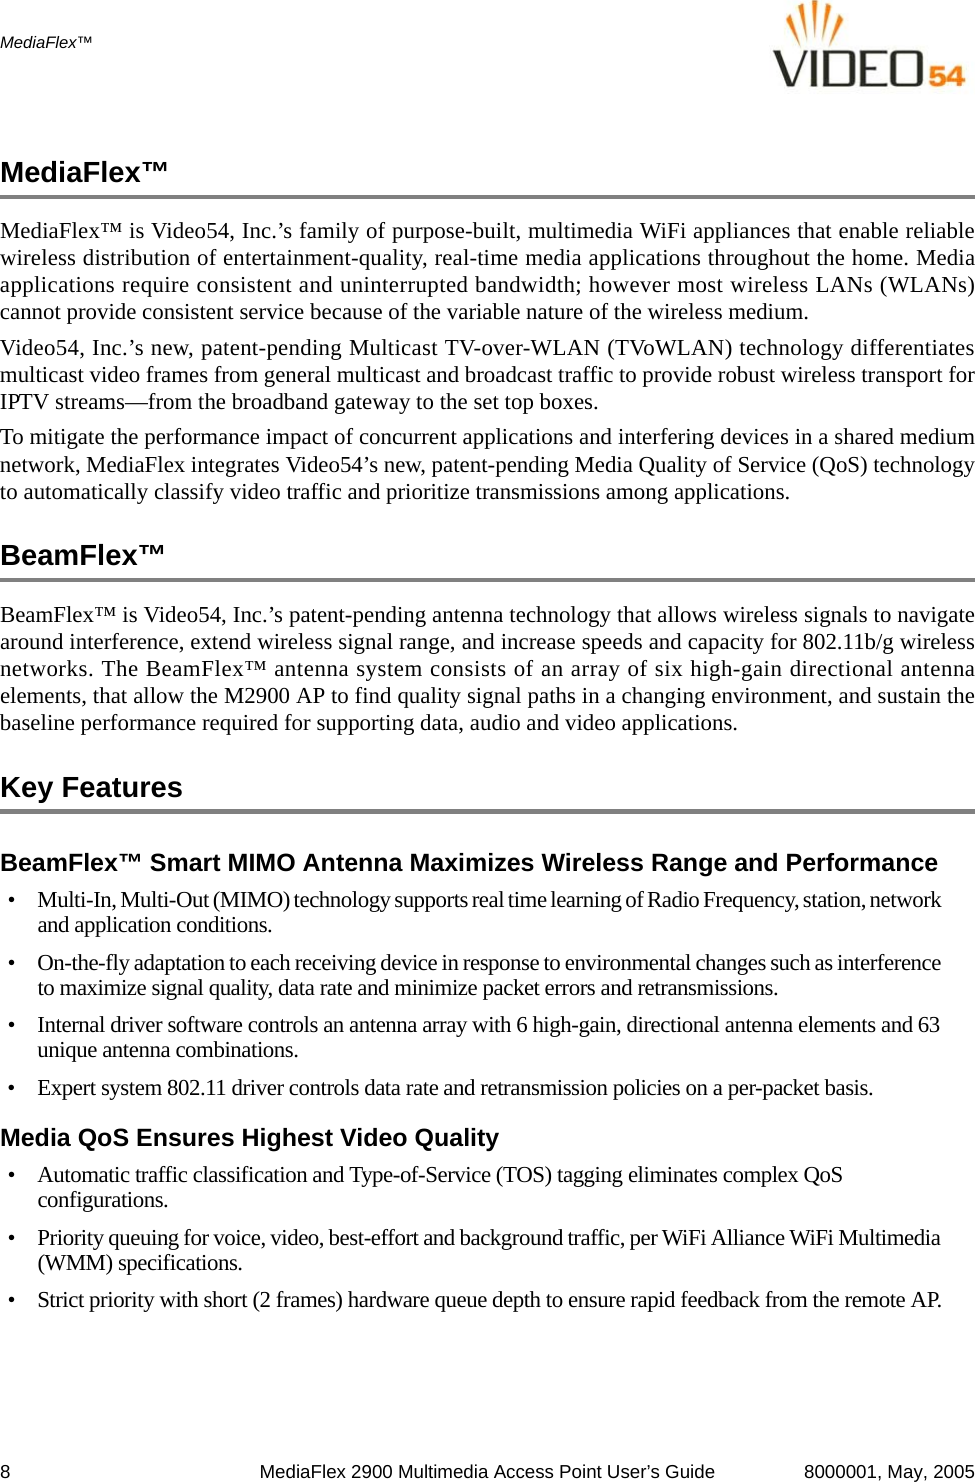 8 MediaFlex 2900 Multimedia Access Point User’s Guide 8000001, May, 2005MediaFlex™MediaFlex™MediaFlex™ is Video54, Inc.’s family of purpose-built, multimedia WiFi appliances that enable reliablewireless distribution of entertainment-quality, real-time media applications throughout the home. Mediaapplications require consistent and uninterrupted bandwidth; however most wireless LANs (WLANs)cannot provide consistent service because of the variable nature of the wireless medium. Video54, Inc.’s new, patent-pending Multicast TV-over-WLAN (TVoWLAN) technology differentiatesmulticast video frames from general multicast and broadcast traffic to provide robust wireless transport forIPTV streams—from the broadband gateway to the set top boxes. To mitigate the performance impact of concurrent applications and interfering devices in a shared mediumnetwork, MediaFlex integrates Video54’s new, patent-pending Media Quality of Service (QoS) technologyto automatically classify video traffic and prioritize transmissions among applications. BeamFlex™ BeamFlex™ is Video54, Inc.’s patent-pending antenna technology that allows wireless signals to navigatearound interference, extend wireless signal range, and increase speeds and capacity for 802.11b/g wirelessnetworks. The BeamFlex™ antenna system consists of an array of six high-gain directional antennaelements, that allow the M2900 AP to find quality signal paths in a changing environment, and sustain thebaseline performance required for supporting data, audio and video applications. Key FeaturesBeamFlex™ Smart MIMO Antenna Maximizes Wireless Range and Performance• Multi-In, Multi-Out (MIMO) technology supports real time learning of Radio Frequency, station, network and application conditions.• On-the-fly adaptation to each receiving device in response to environmental changes such as interference to maximize signal quality, data rate and minimize packet errors and retransmissions.• Internal driver software controls an antenna array with 6 high-gain, directional antenna elements and 63 unique antenna combinations. • Expert system 802.11 driver controls data rate and retransmission policies on a per-packet basis.Media QoS Ensures Highest Video Quality• Automatic traffic classification and Type-of-Service (TOS) tagging eliminates complex QoS configurations. • Priority queuing for voice, video, best-effort and background traffic, per WiFi Alliance WiFi Multimedia (WMM) specifications.• Strict priority with short (2 frames) hardware queue depth to ensure rapid feedback from the remote AP.